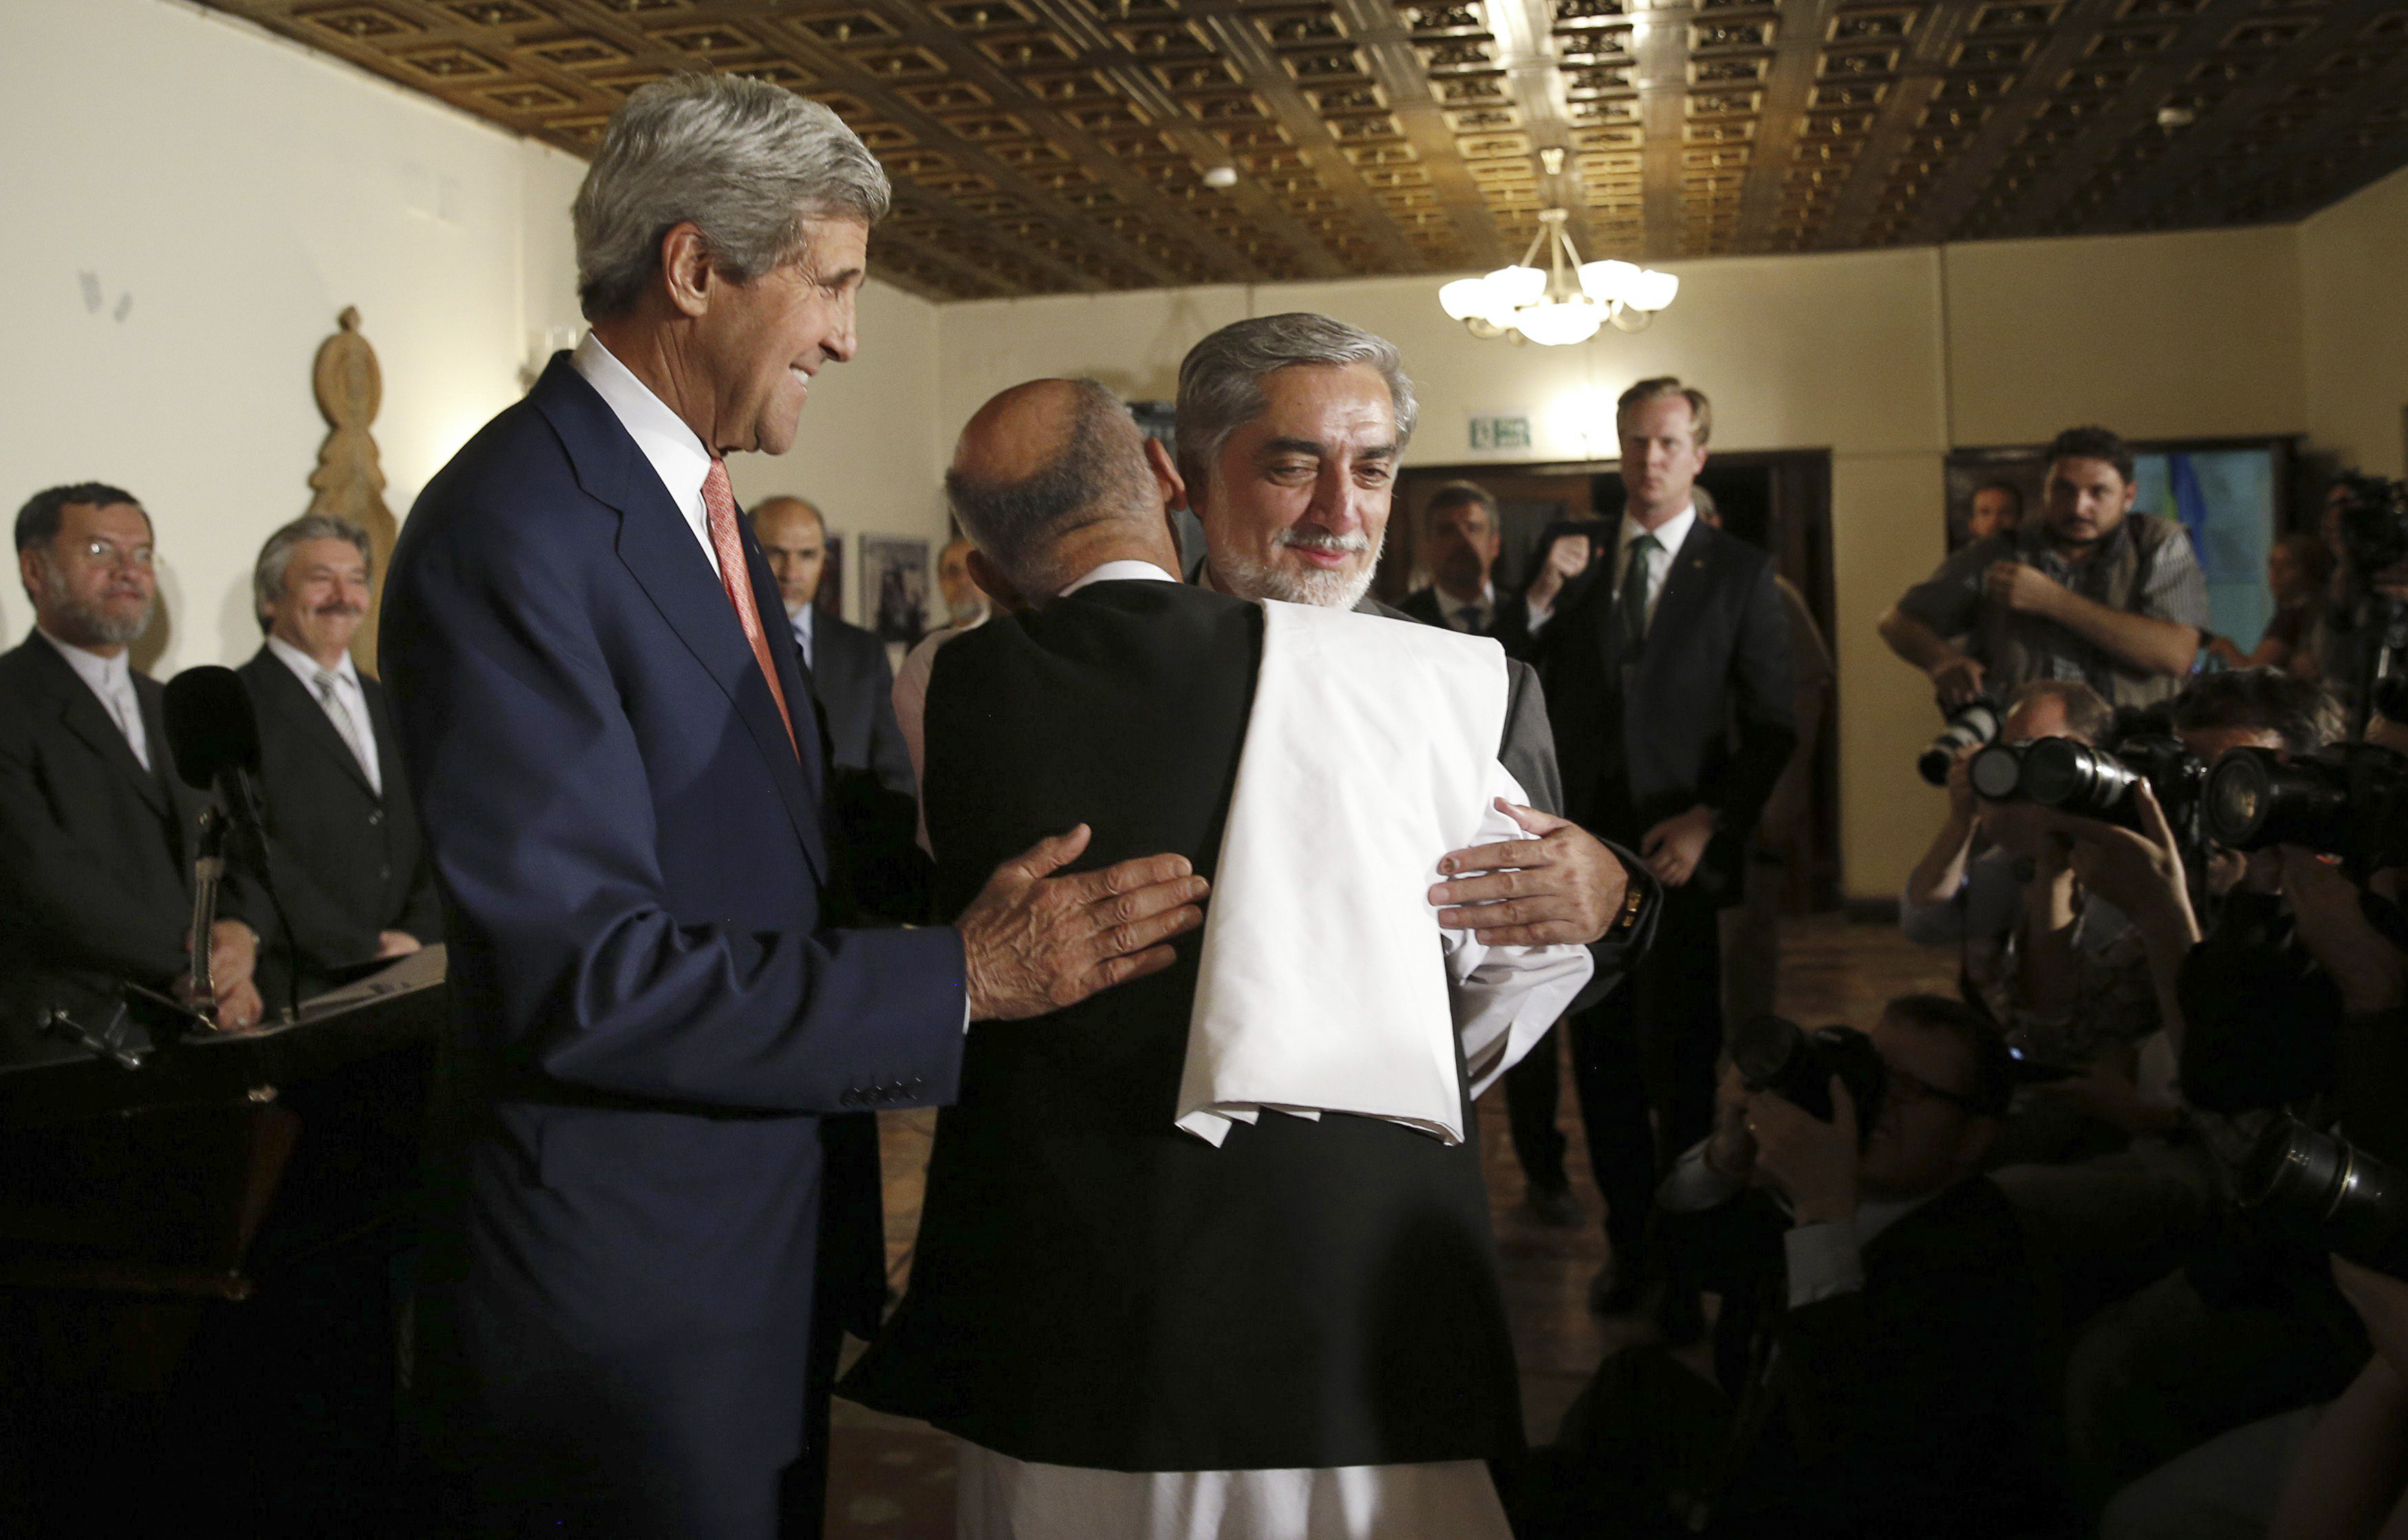 Presidential candidates Abdullah Abdullah, right, and Ashraf Ghani embrace at a news conference with Secretary of State John Kerry where a deal to audit ballots was announced, in Kabul, Afghanistan on July 12, 2014. (Jim Bourg—The New York Times/Redux)